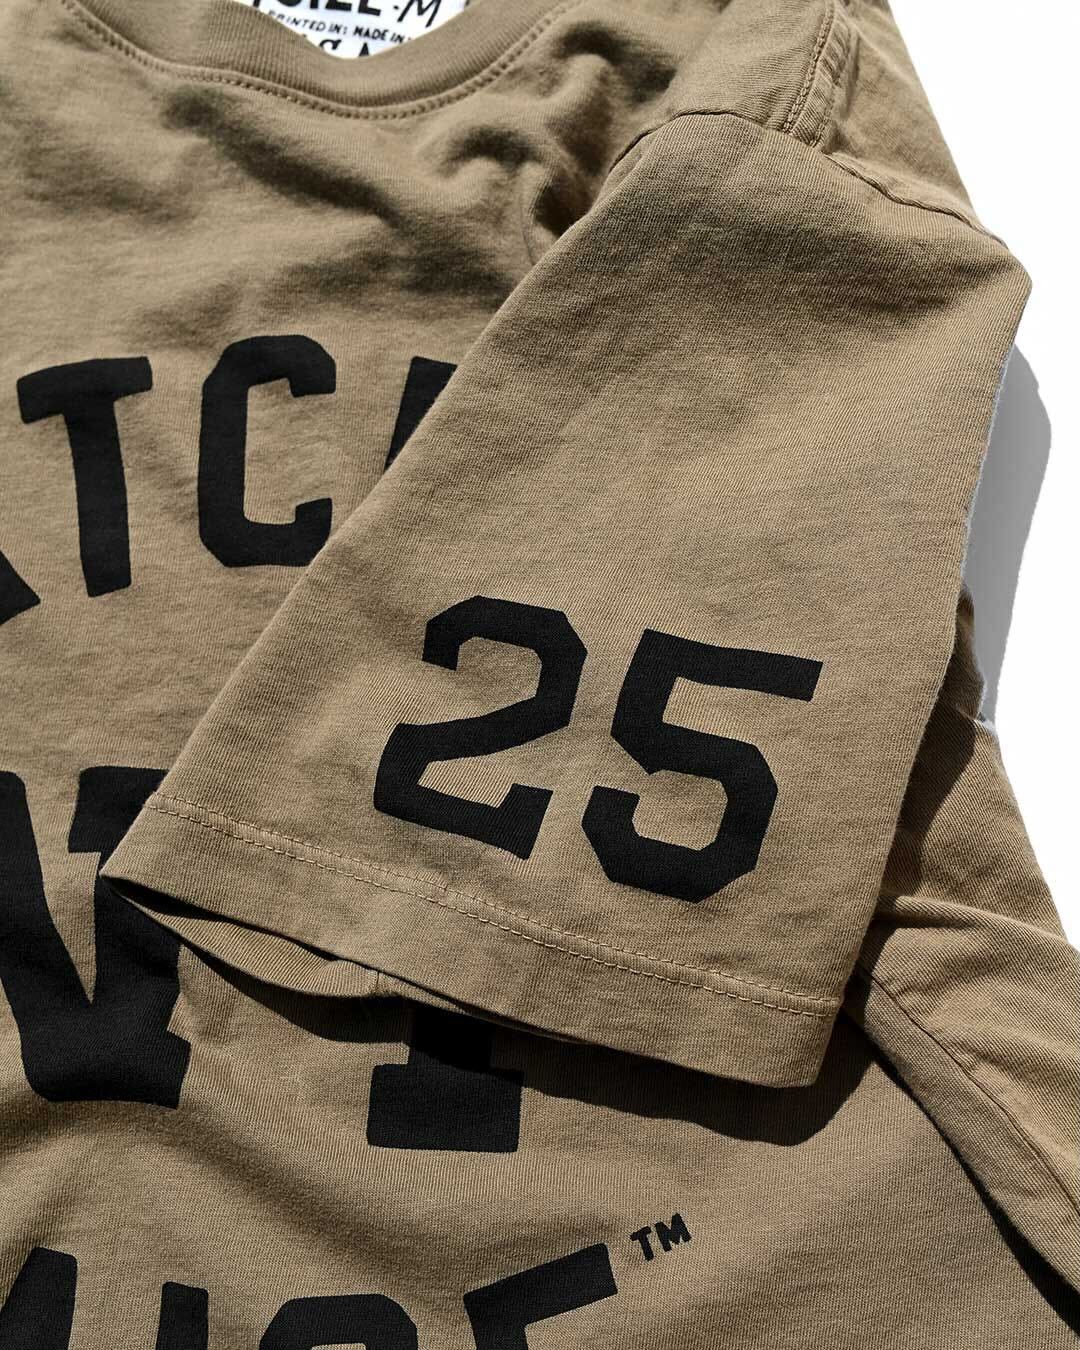 Satchel Paige #24 NY Olive Tee - Roots of Fight Canada